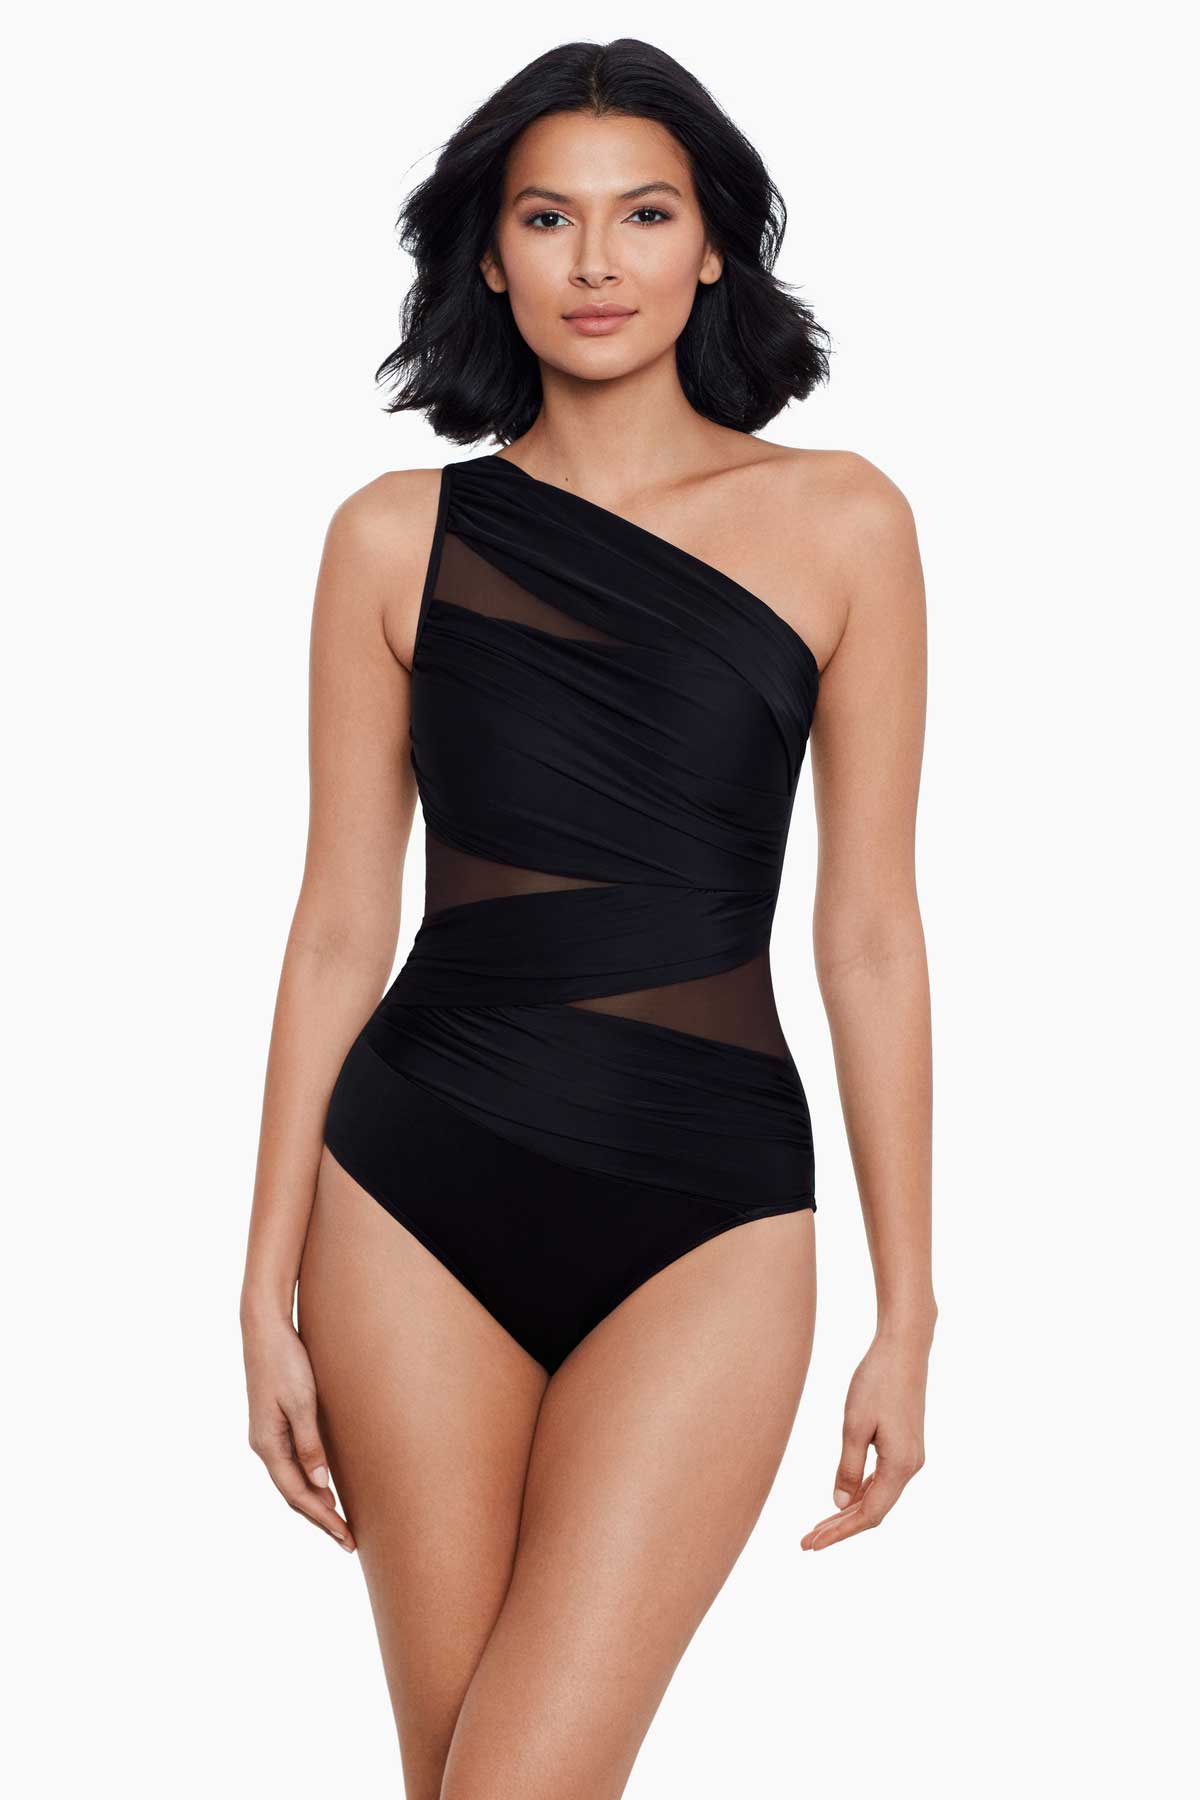 Wholesale Shaping Tummy control One Piece Swimsuit